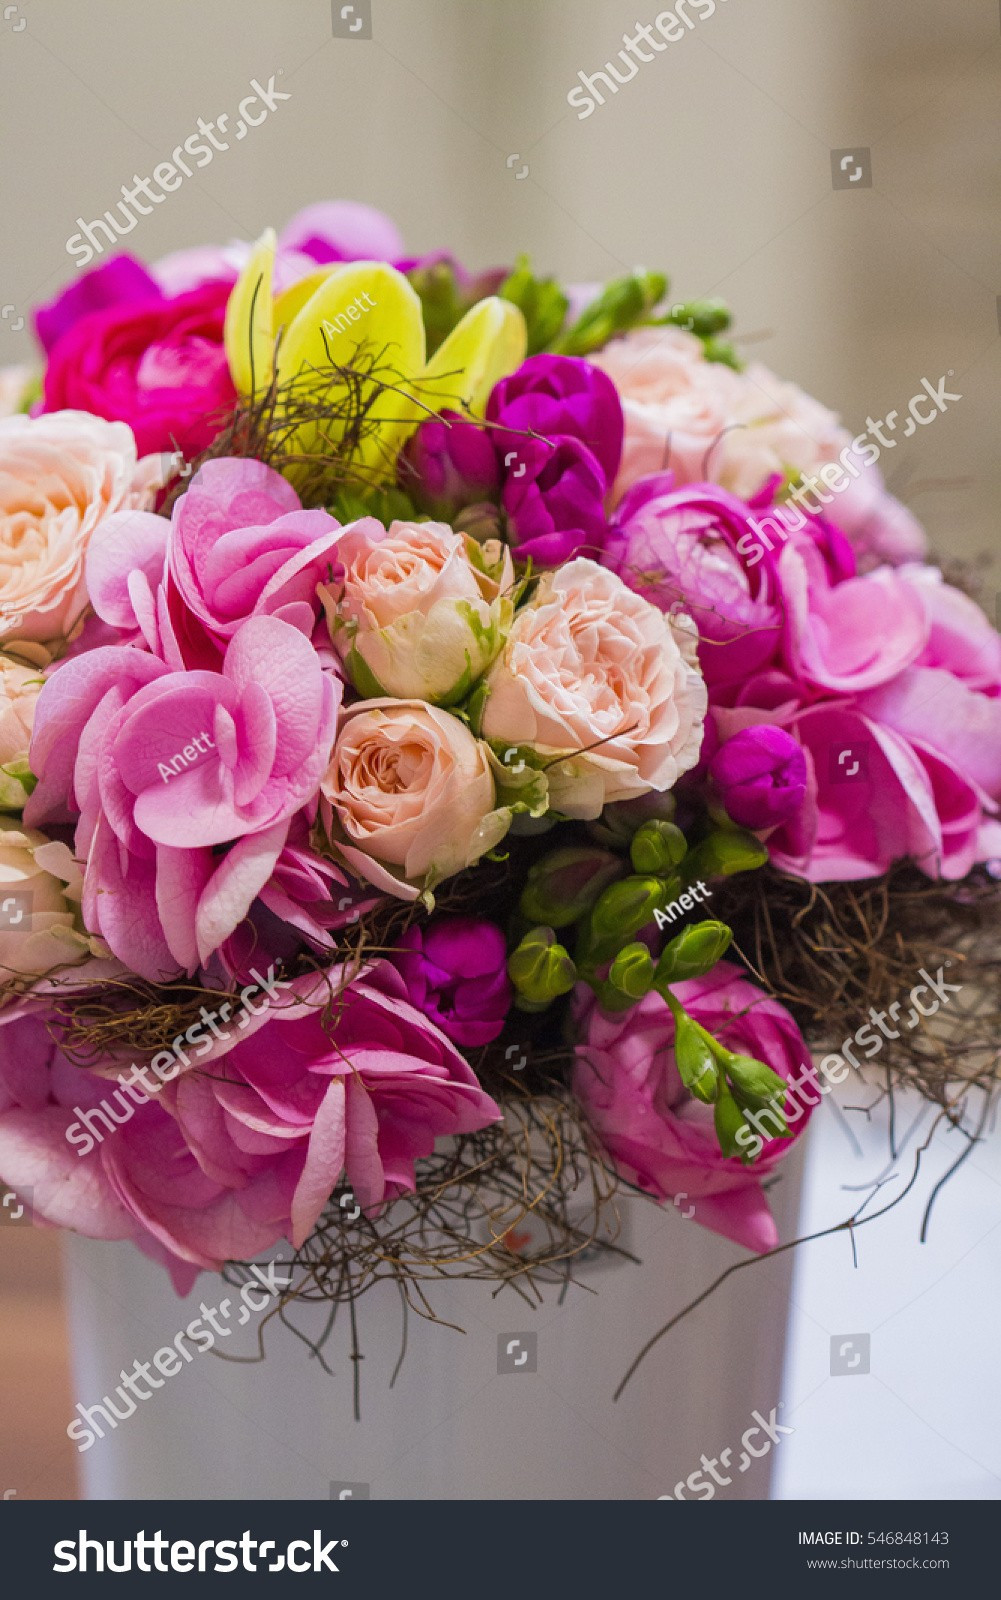 30 attractive Pink Flowers In Vase 2024 free download pink flowers in vase of flowers pink roses color pictures fresh pink roses with wax flowerh for flowers pink roses color pictures inspirational modern weding bouquet vivid magenta color stoc